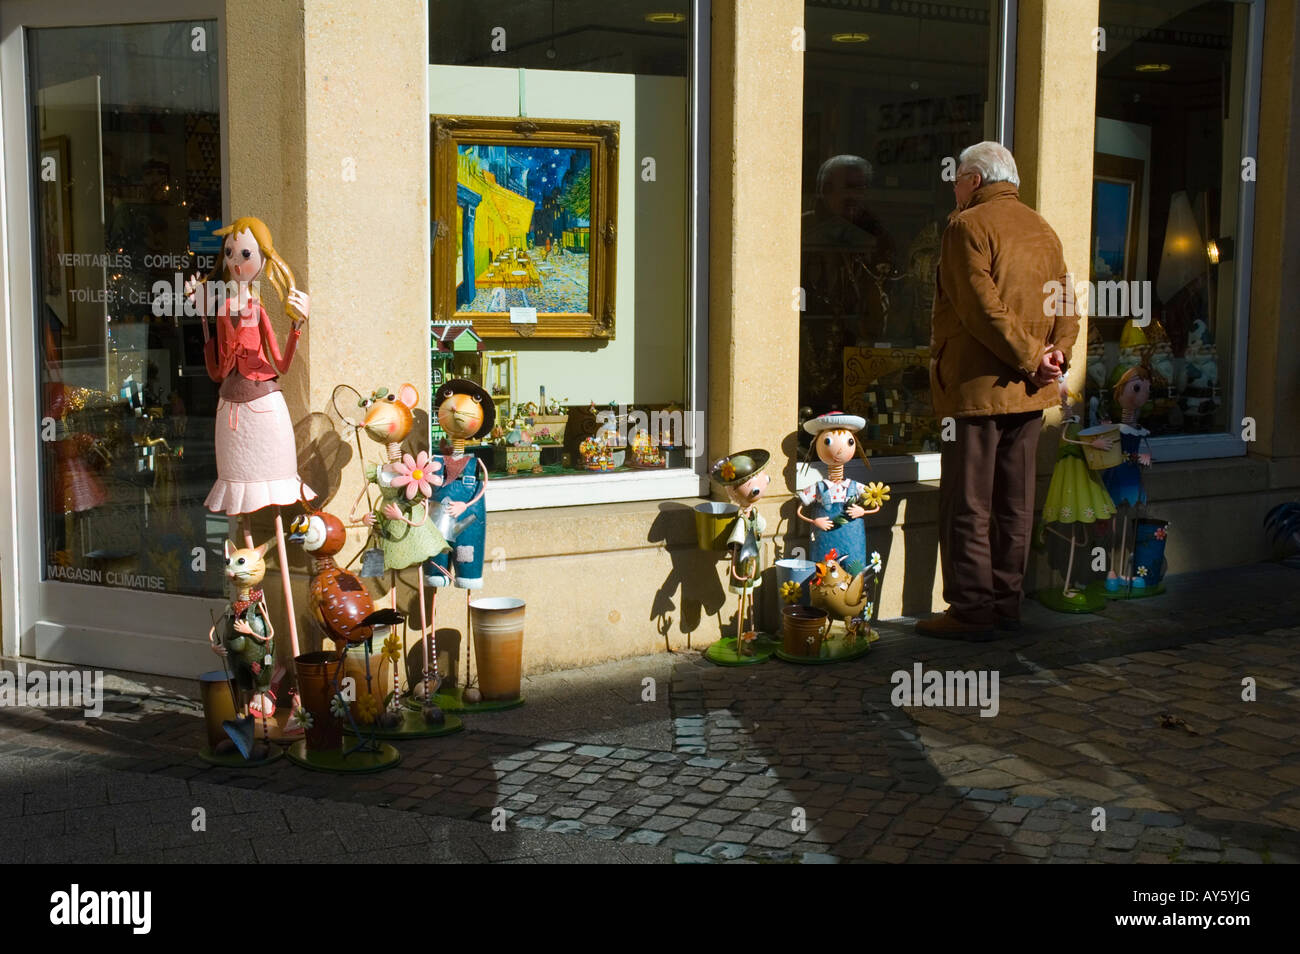 Arts shop in central Ville de Luxembourg Europe Stock Photo